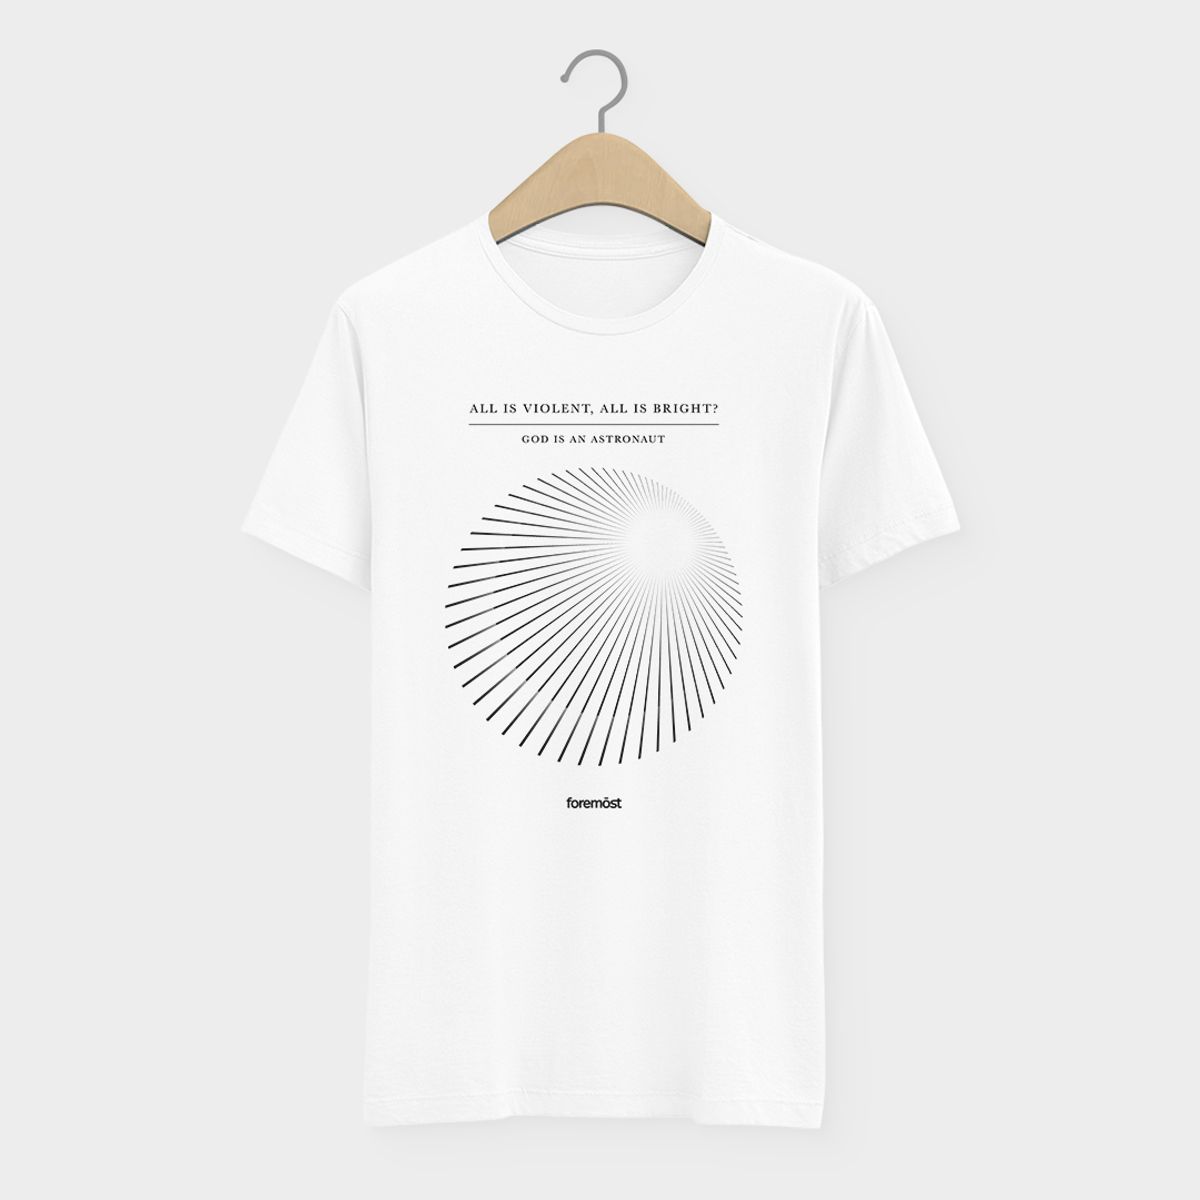 Nome do produto: Camiseta God Is An Astronaut All is Violent, All is Bright Post Rock